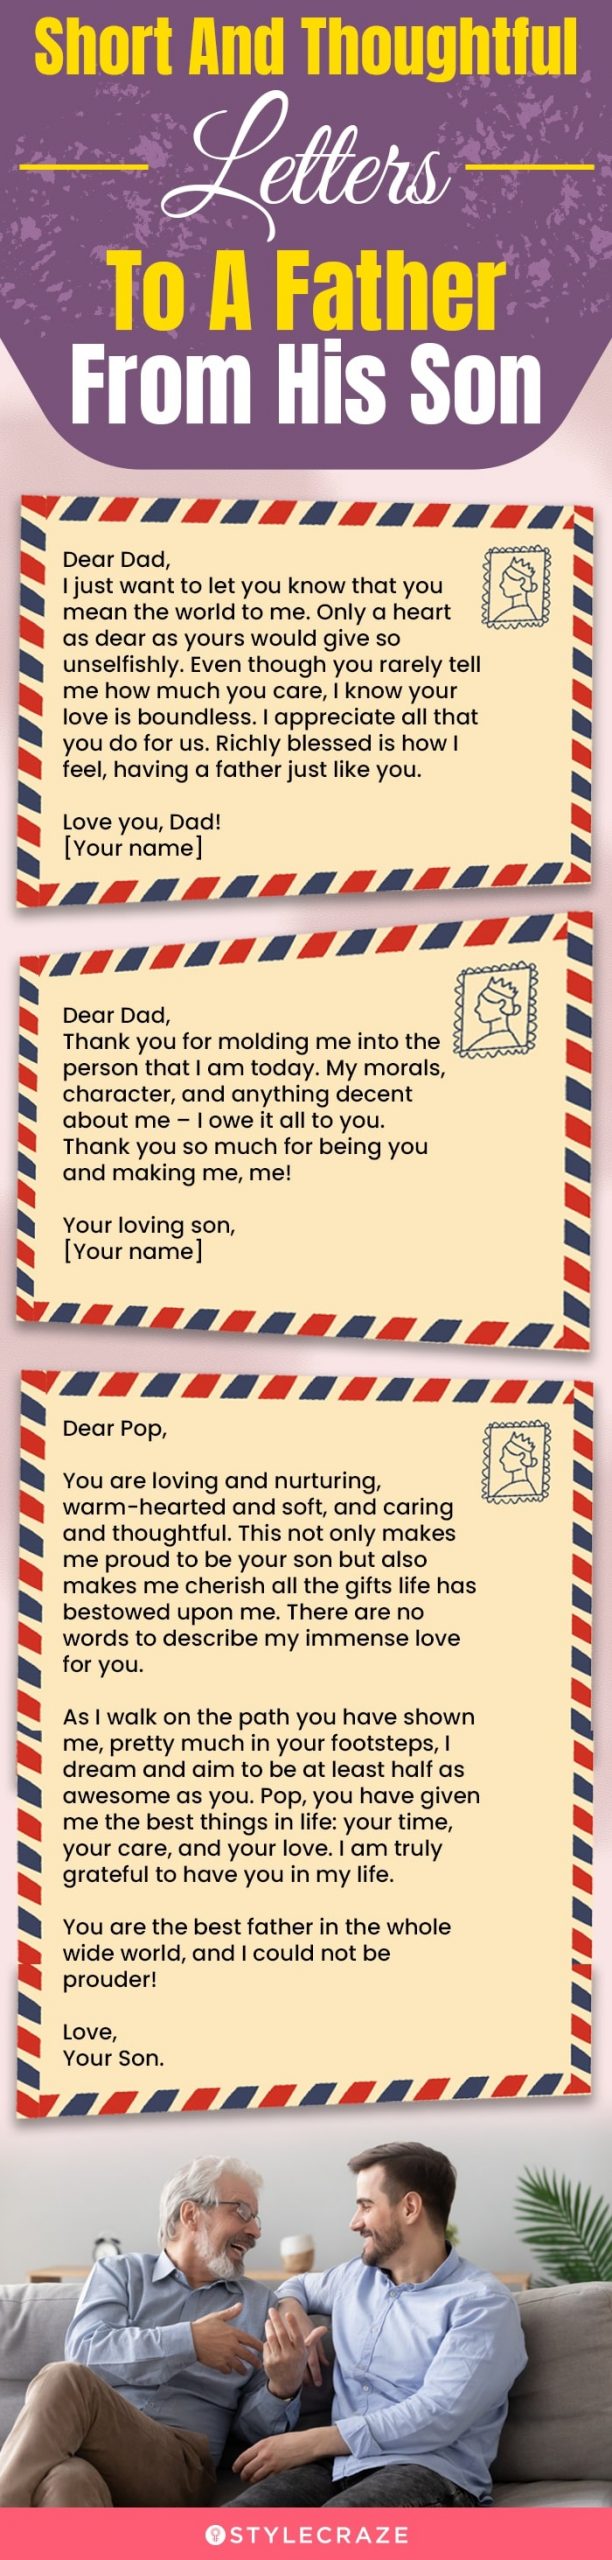 short and thoughtful letters to a father from his son (infographic)